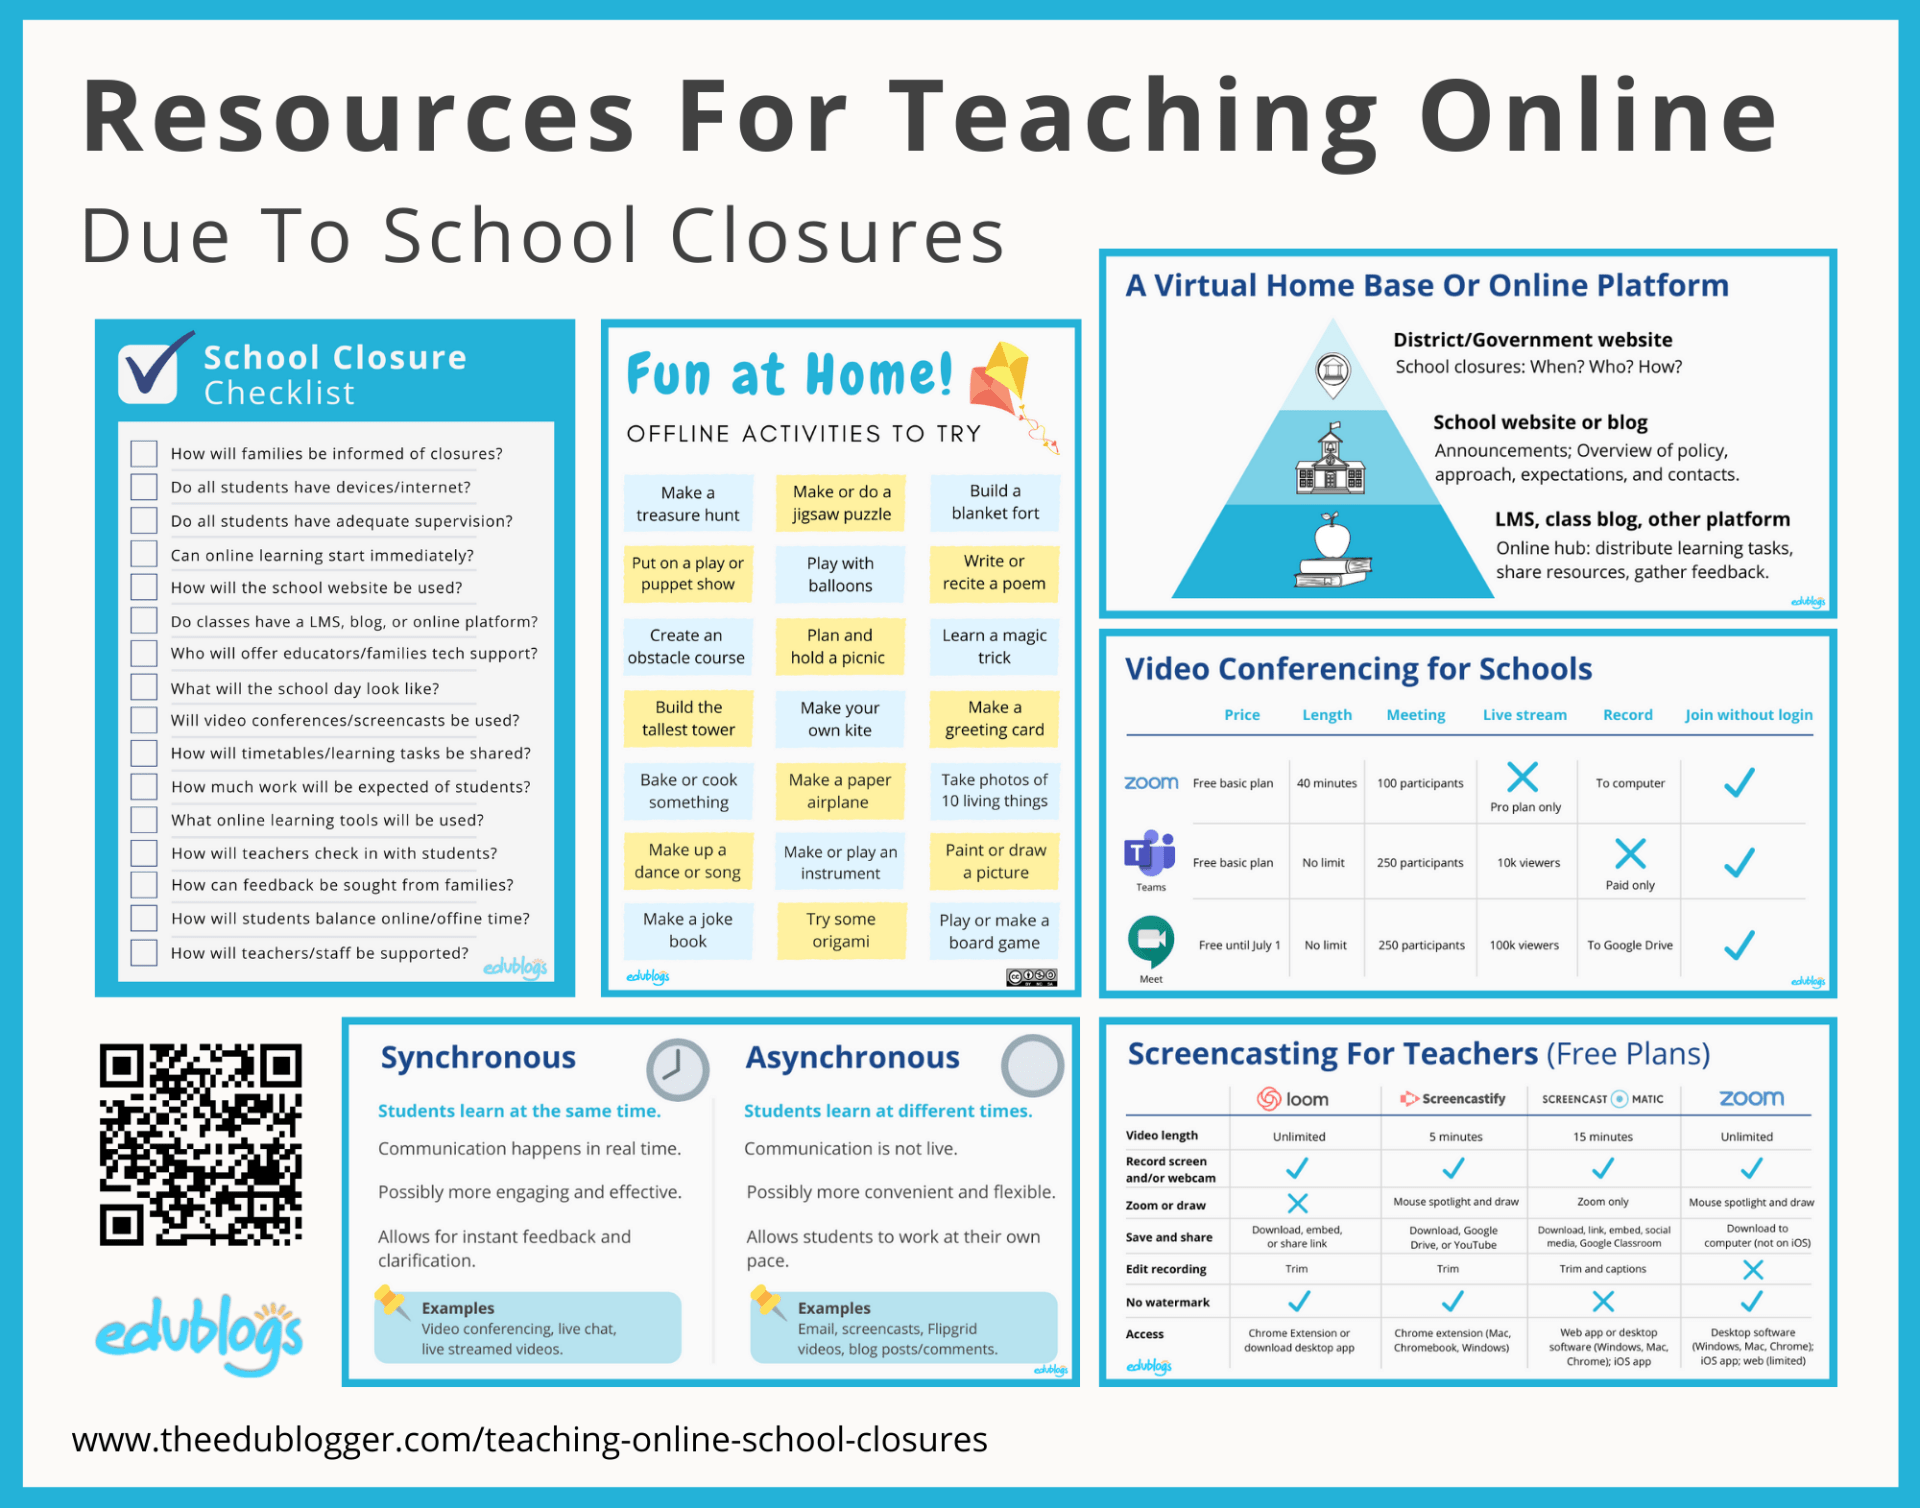 Resources For Teaching Online Due To School Closures